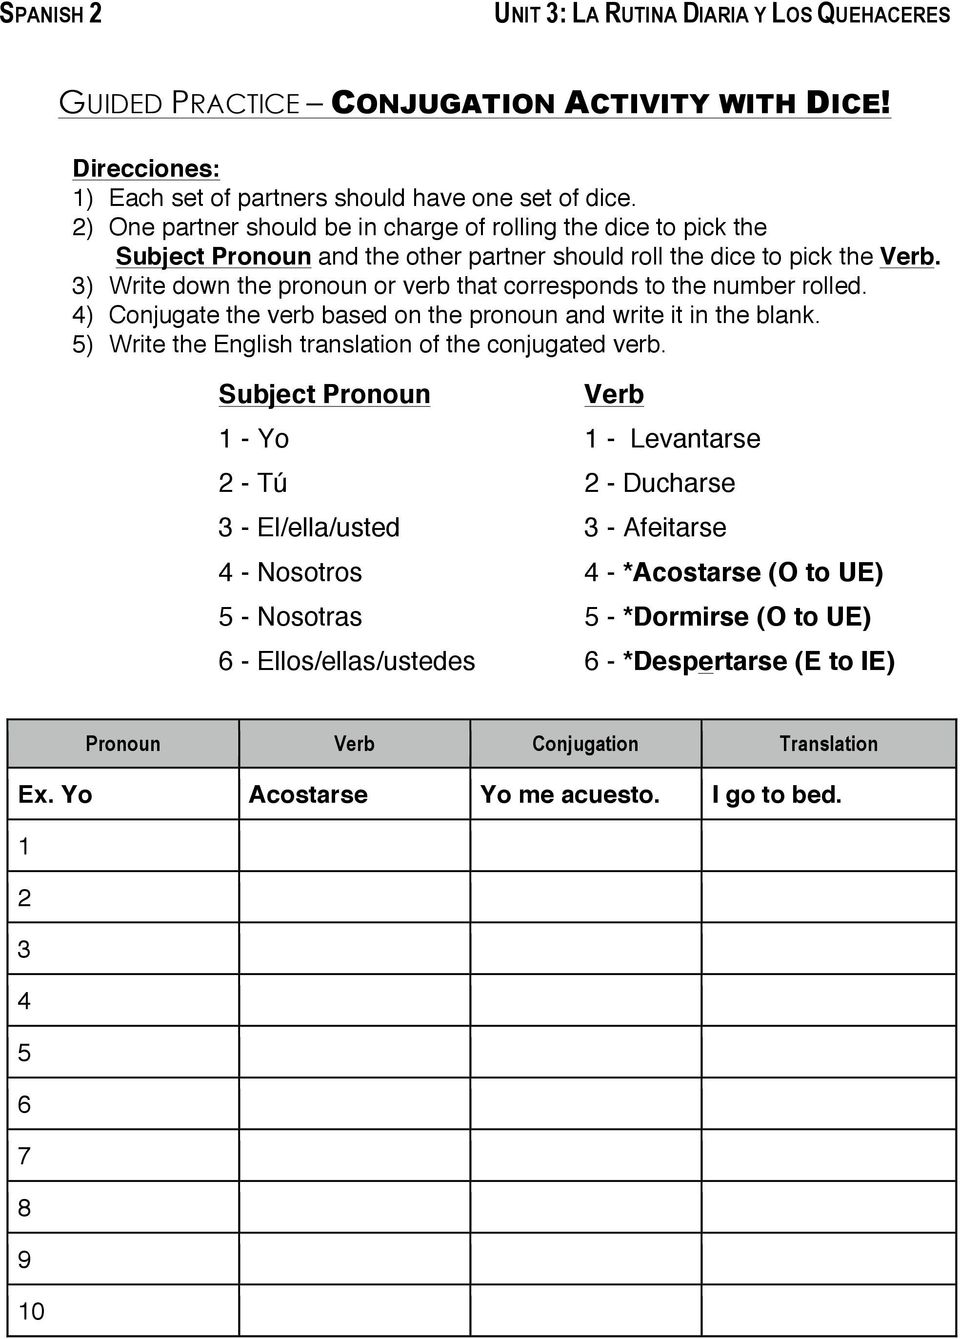 3) Write down the pronoun or verb that corresponds to the number rolled. 4) Conjugate the verb based on the pronoun and write it in the blank.